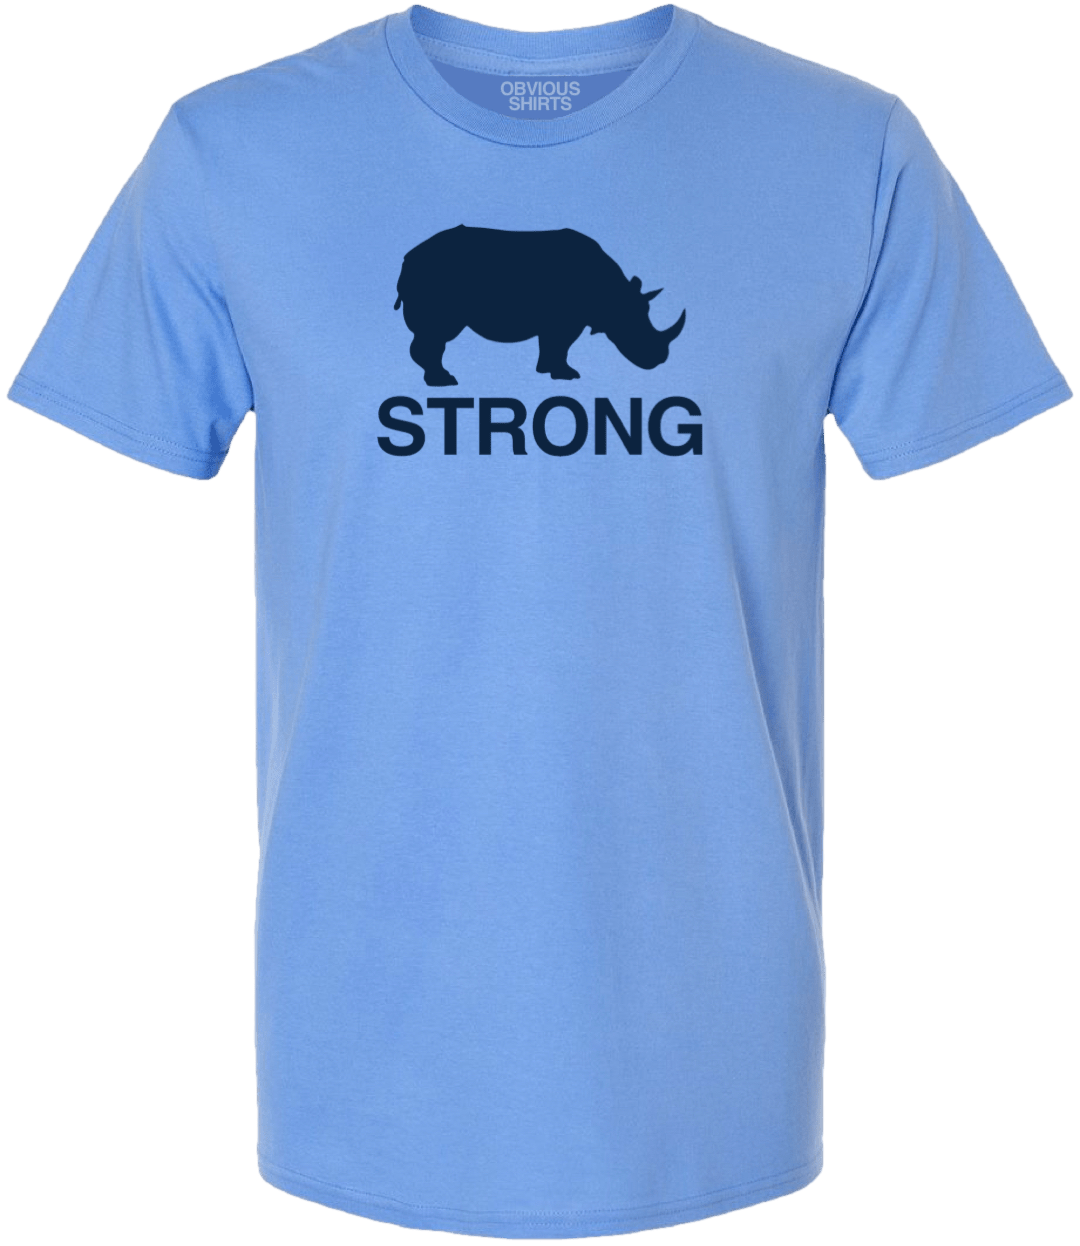 RYNO + STRONG - OBVIOUS SHIRTS